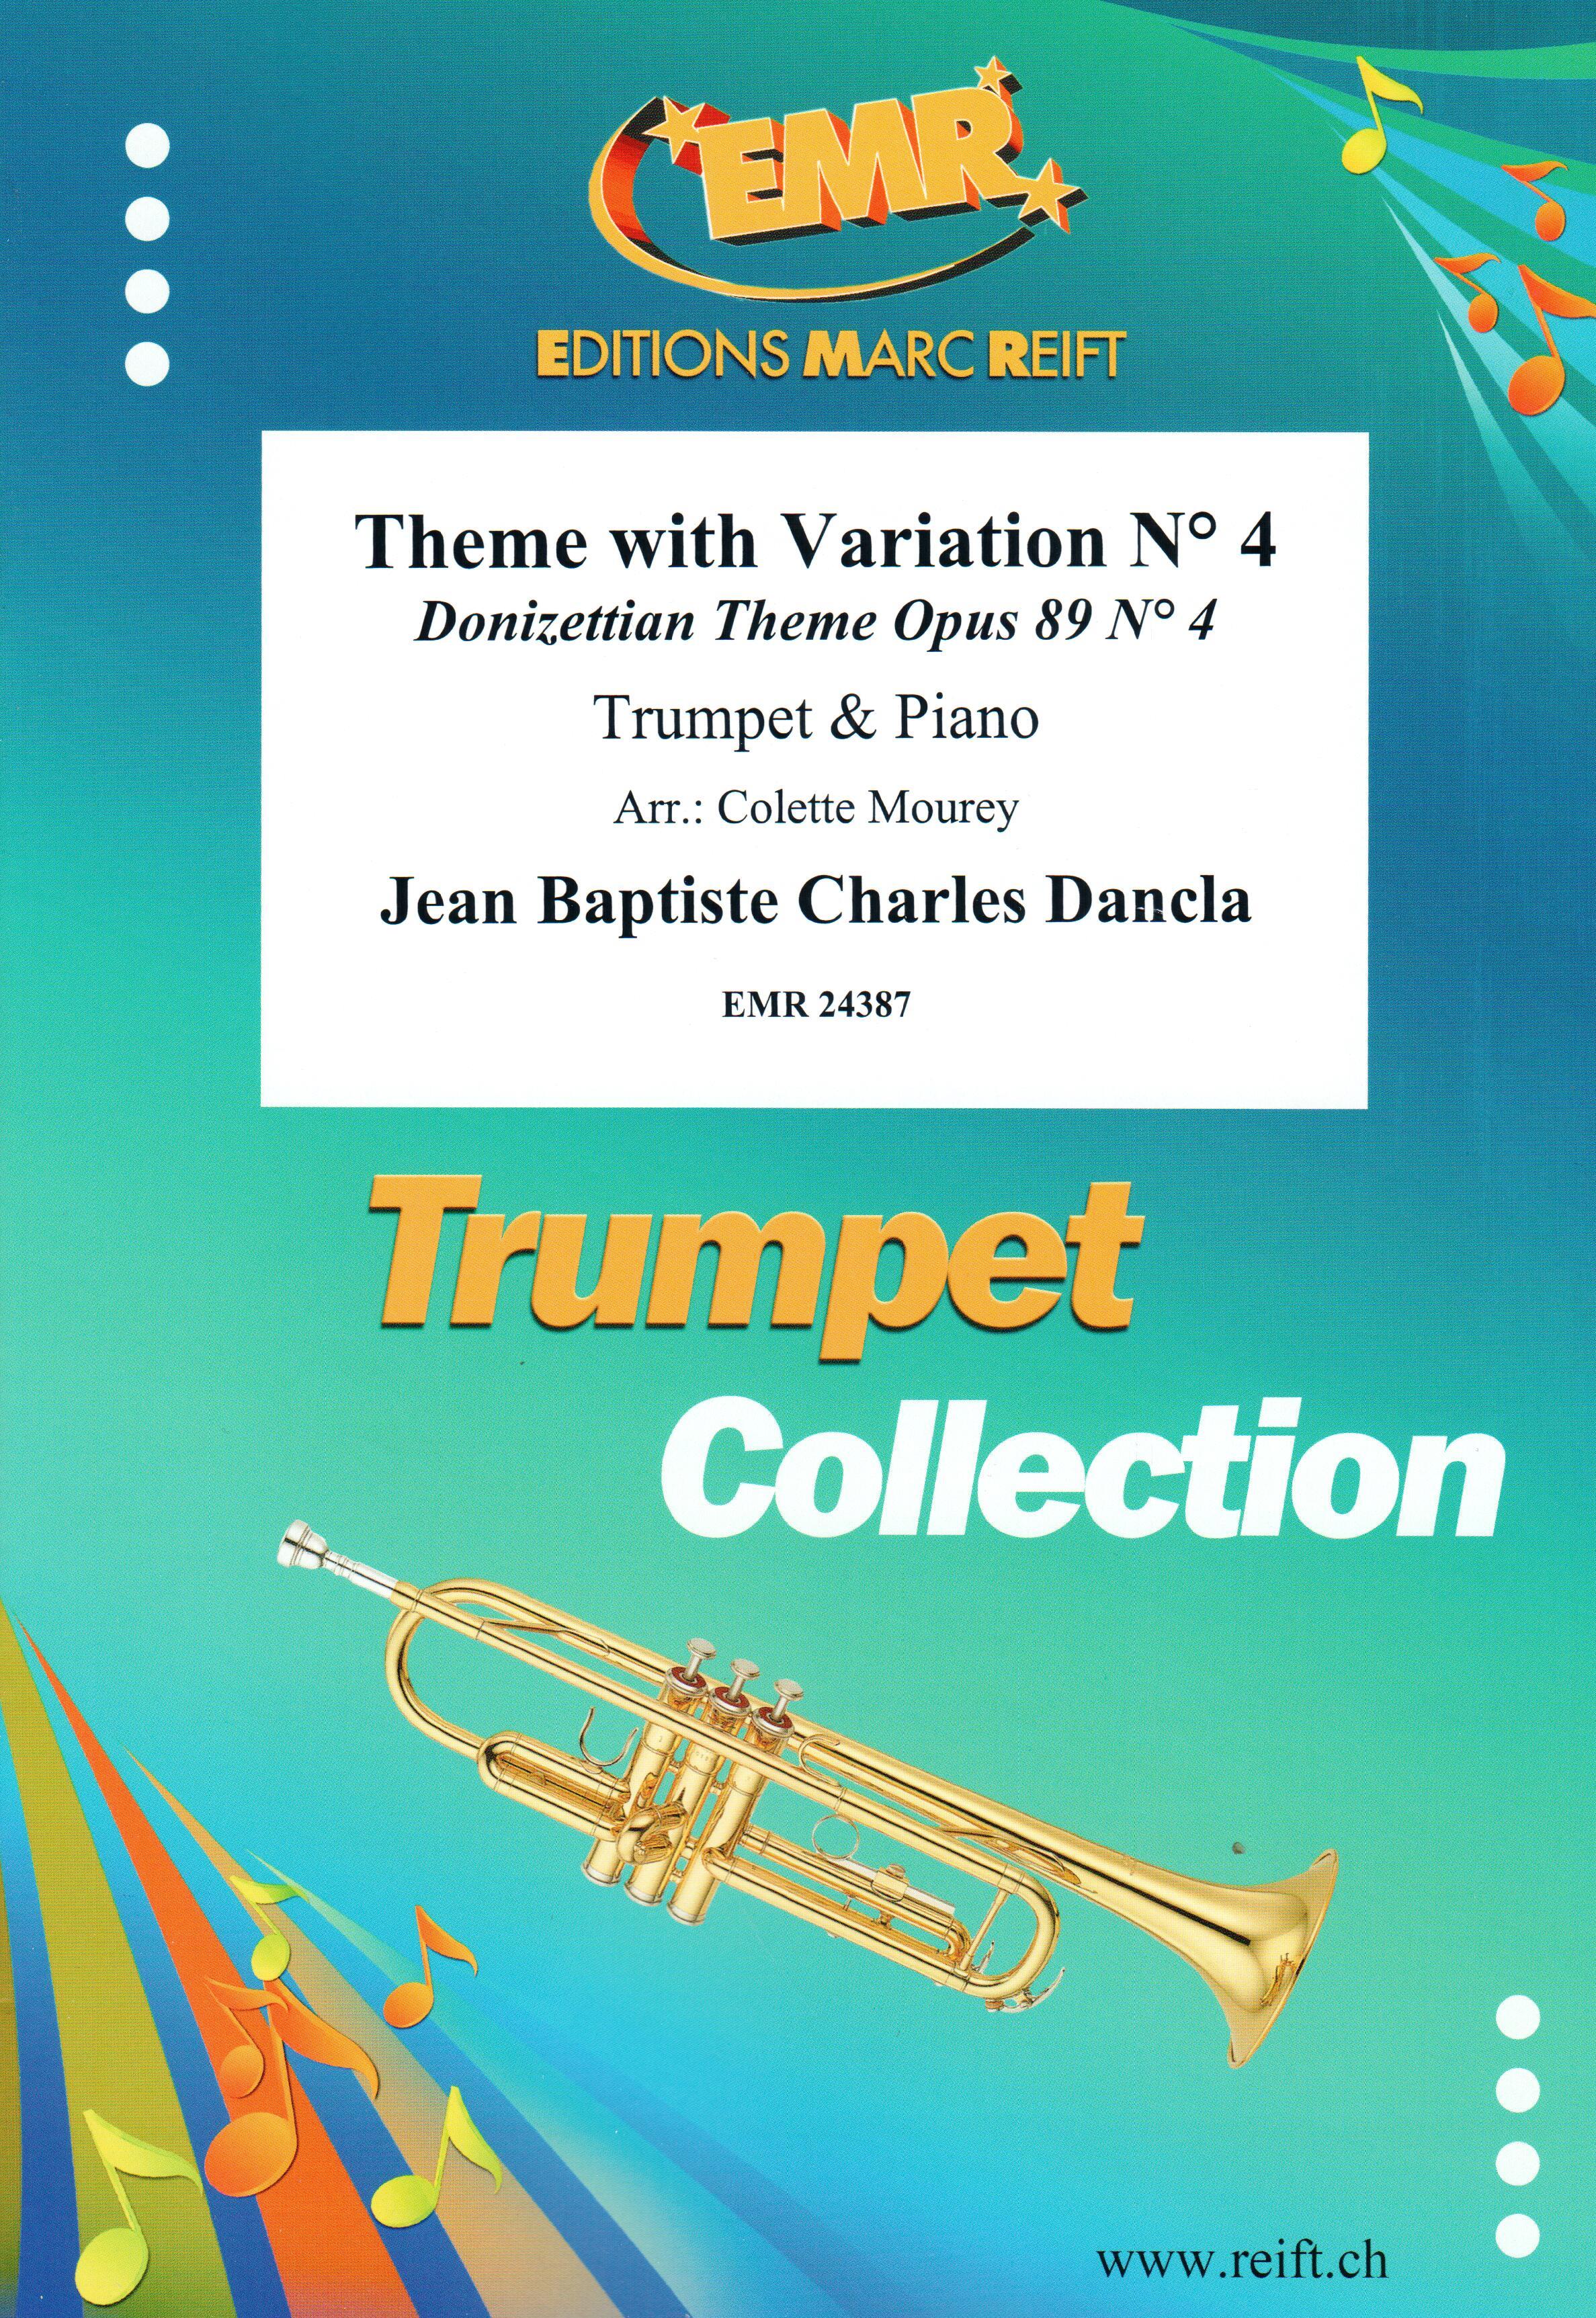 THEME WITH VARIATIONS N° 4